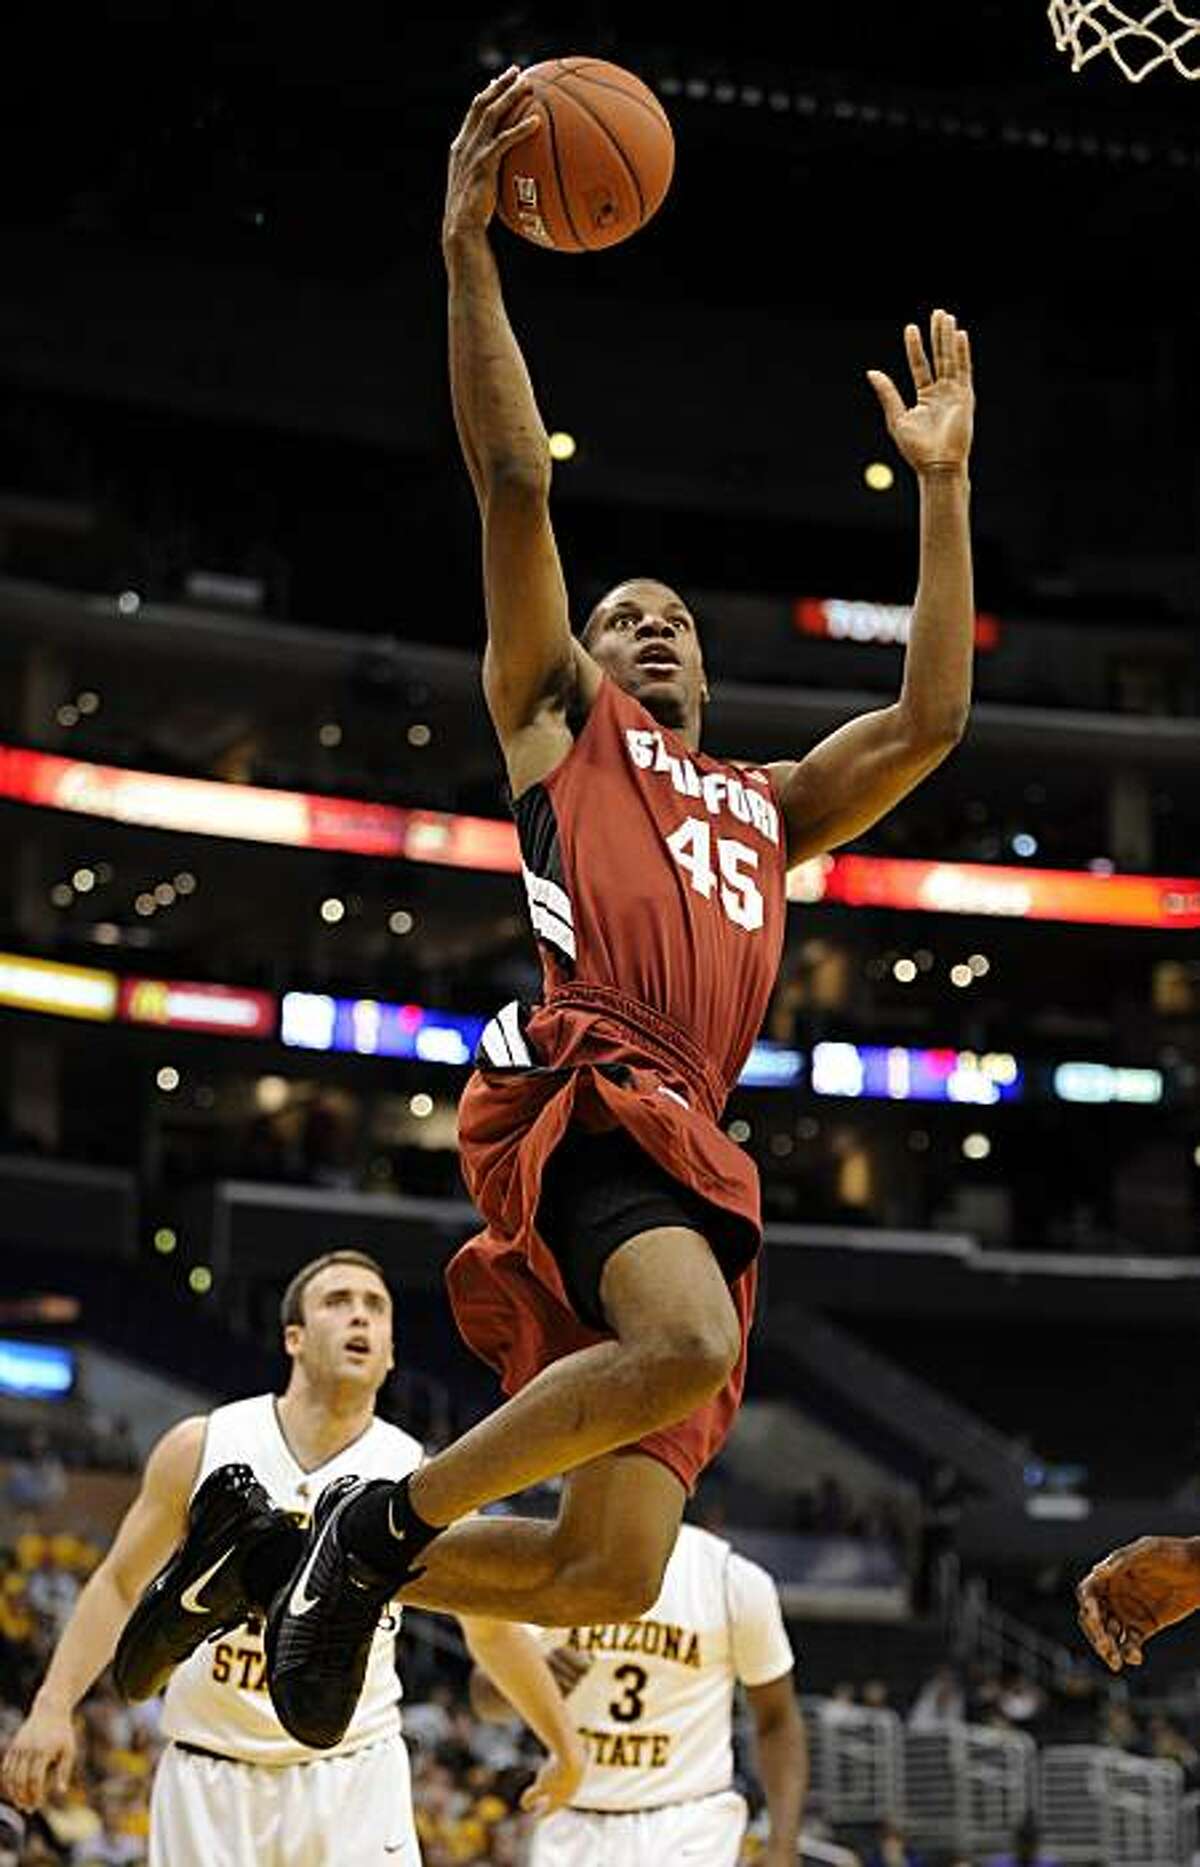 Stanford's Jeremy Green goes up for a shot as Arizona State's Derek Glasser, left, and Ty Abbott look on during the first half of an NCAA college basketball game at the Pac-10 Conference tournament, Thursday, March 11, 2010, in Los Angeles. AP Photo/Mark J. Terrill)